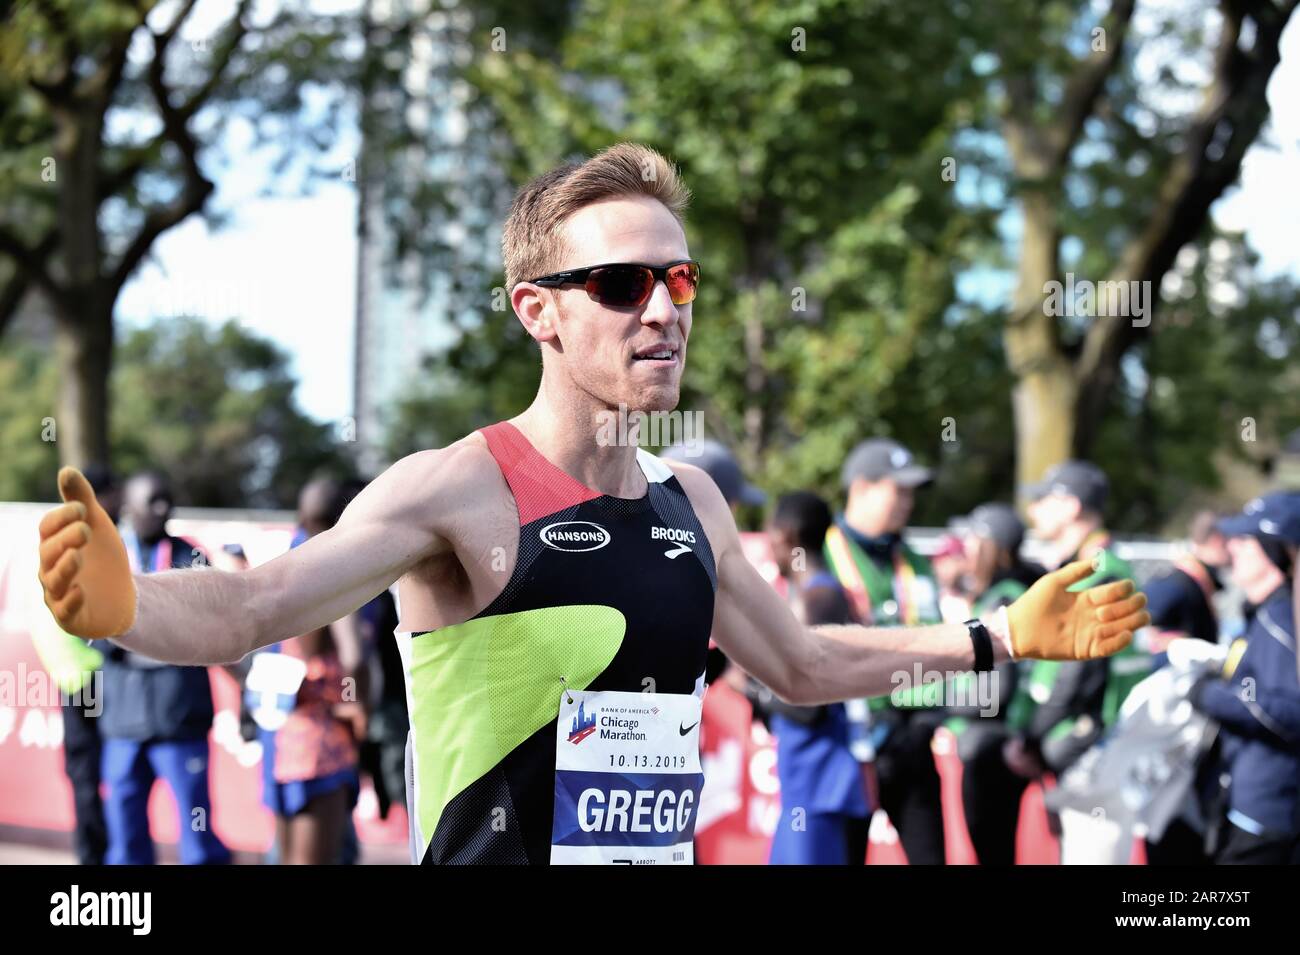 Chicago, Illinois, USA. Brendan Greg of the United States welcomed the finish line with open arms at the 2019 Chicago Marathon. Stock Photo